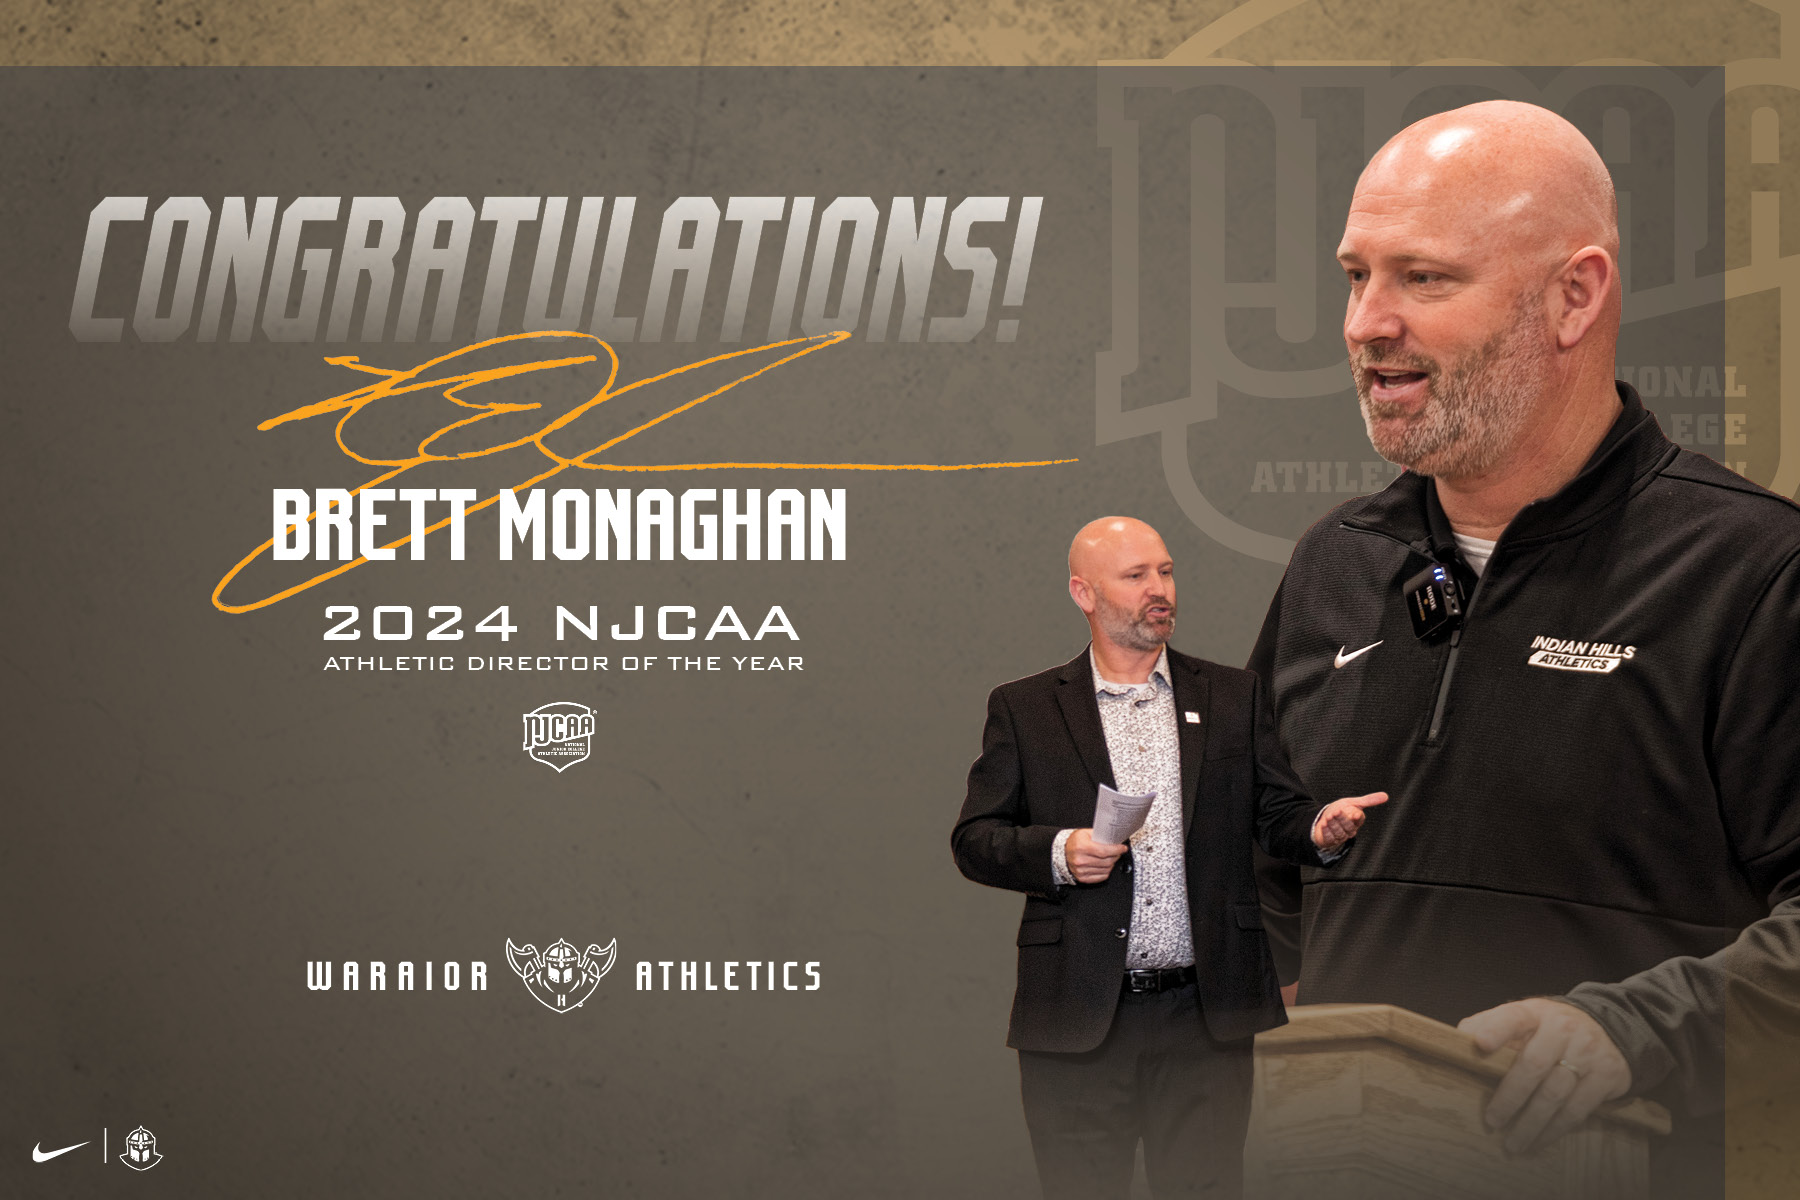 MONAGHAN NAMED NJCAA AD OF THE YEAR